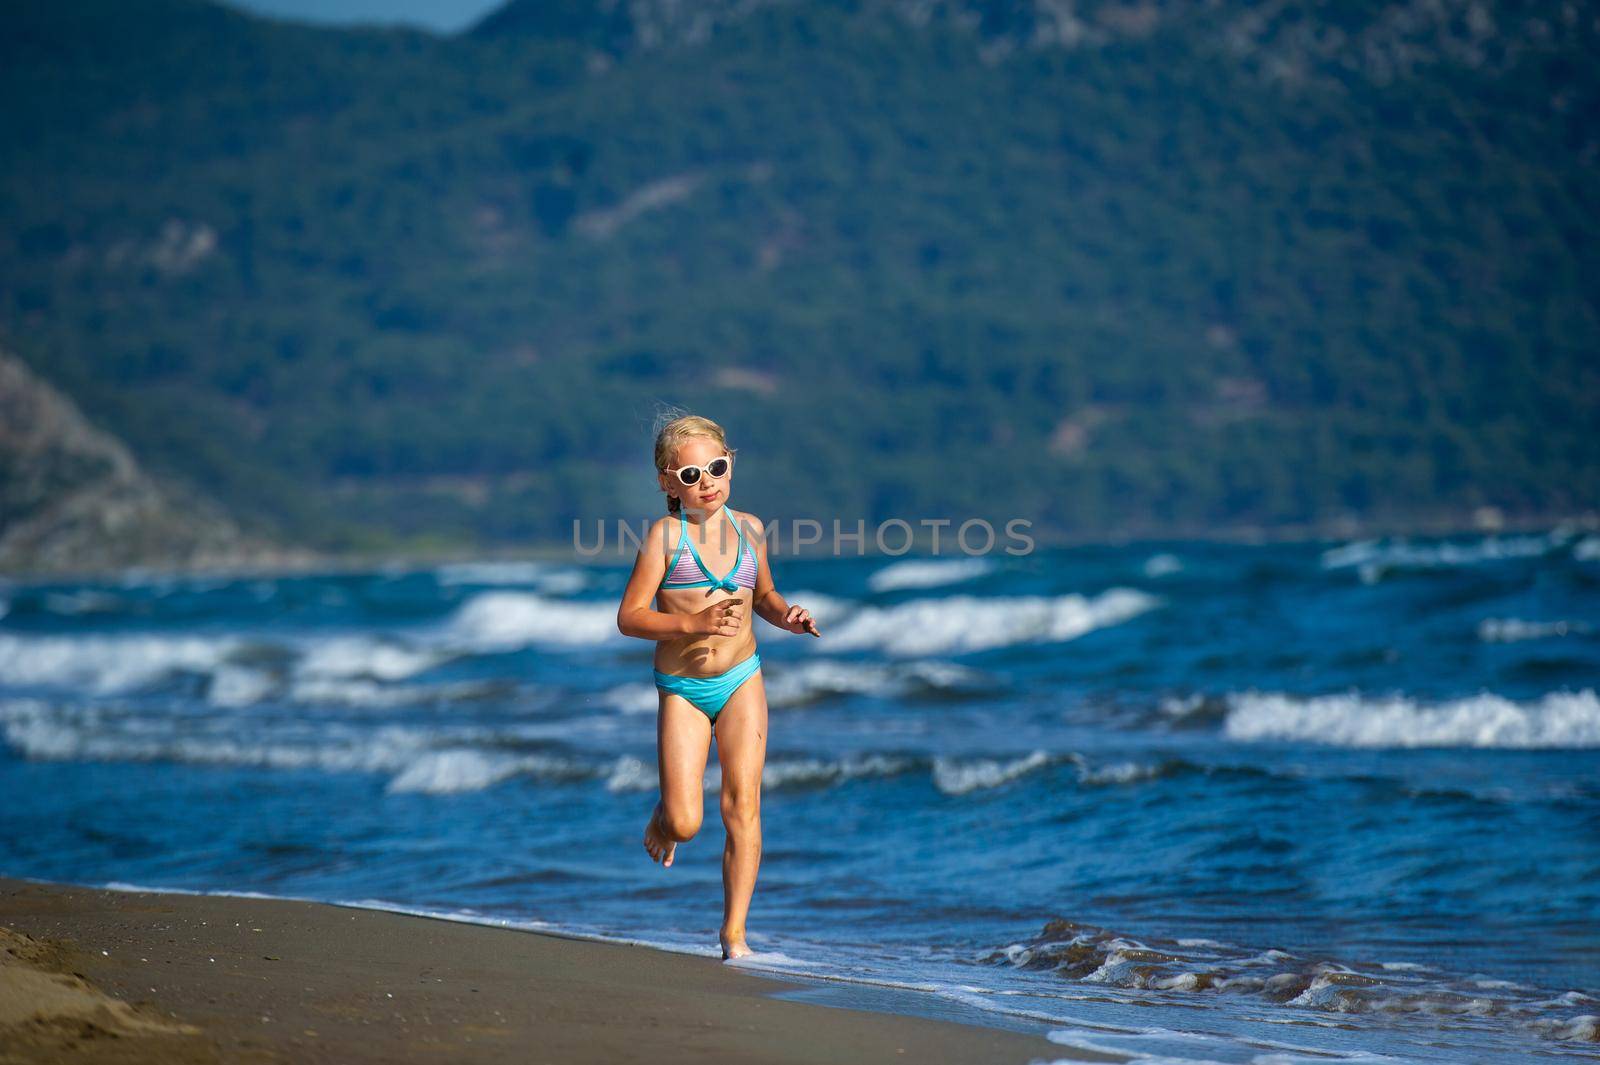 A little girl in a blue swimsuit and glasses runs on a Mediterranean beach in Turkey by Lobachad